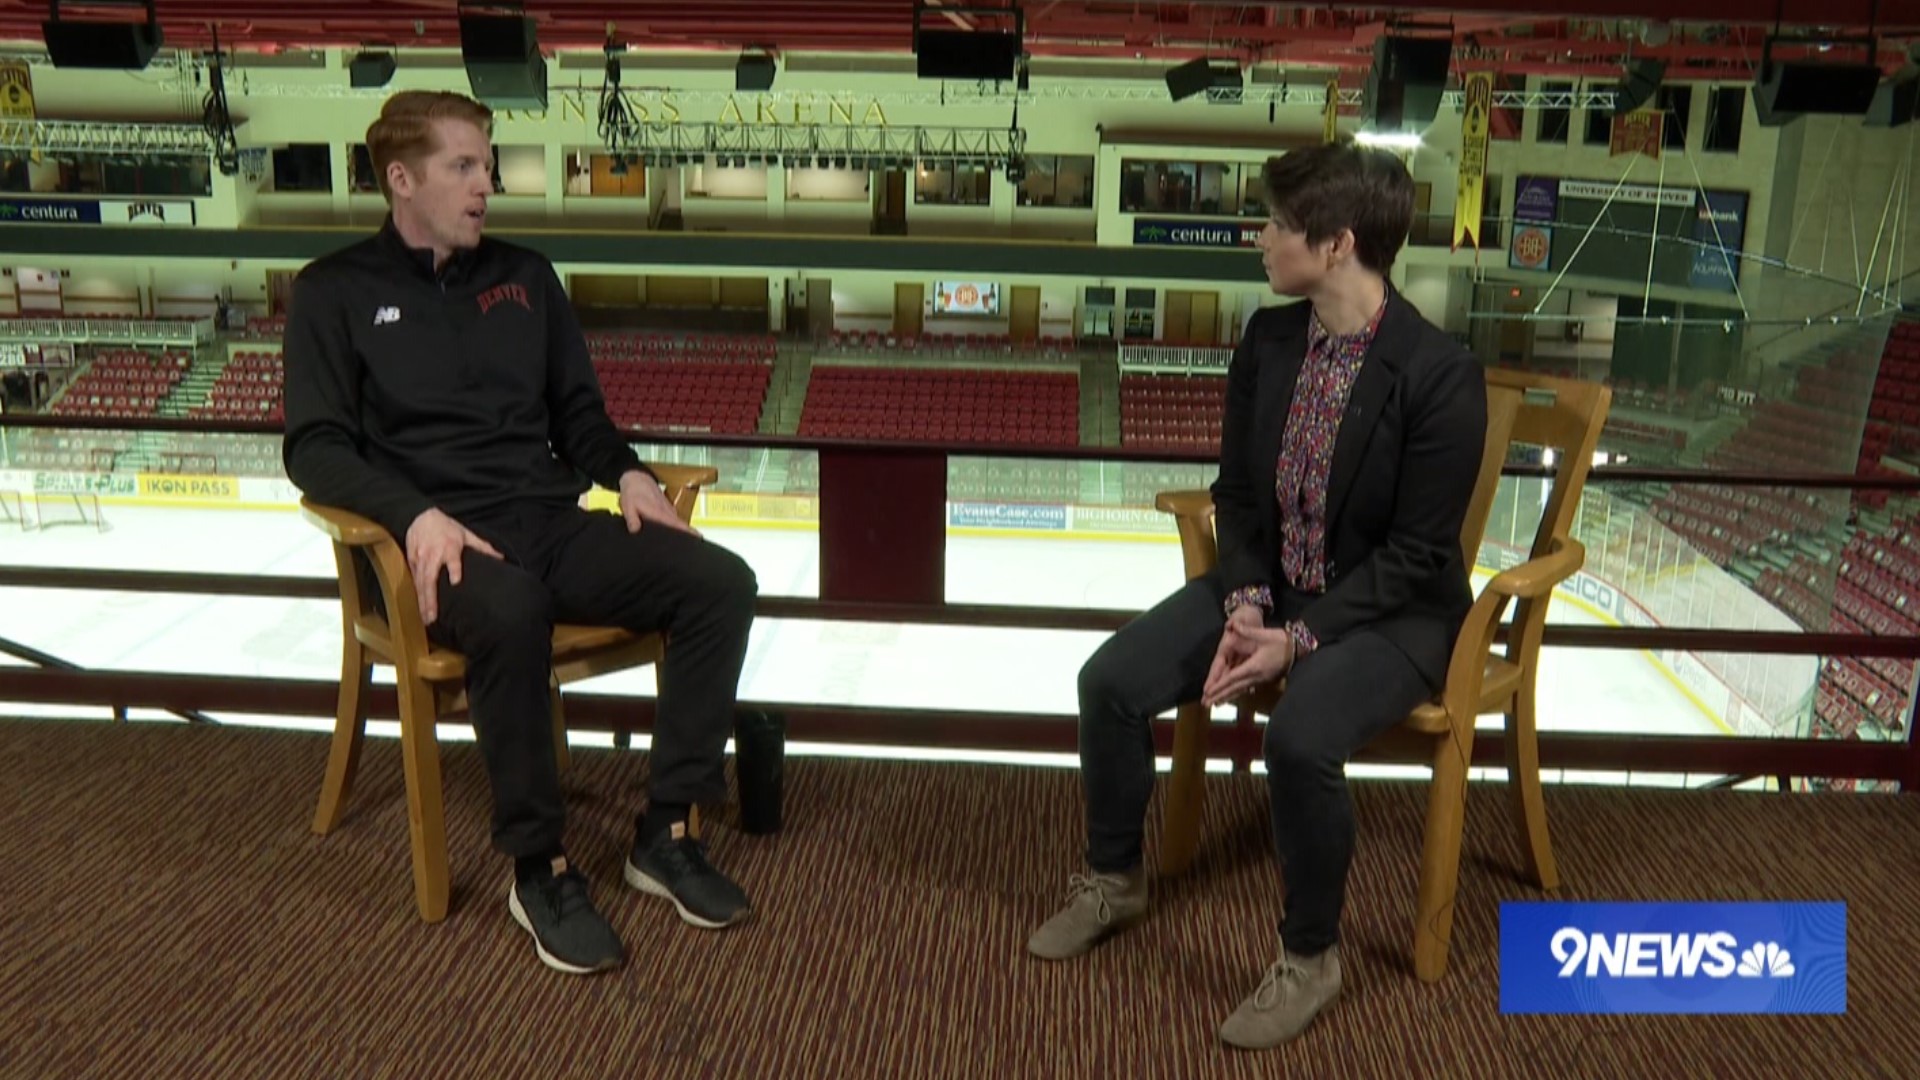 9NEWS Sports Reporter Arielle Orsuto sat down with University of Denver hockey head coach David Carle before the Pioneers head to Boston for the Frozen Four.